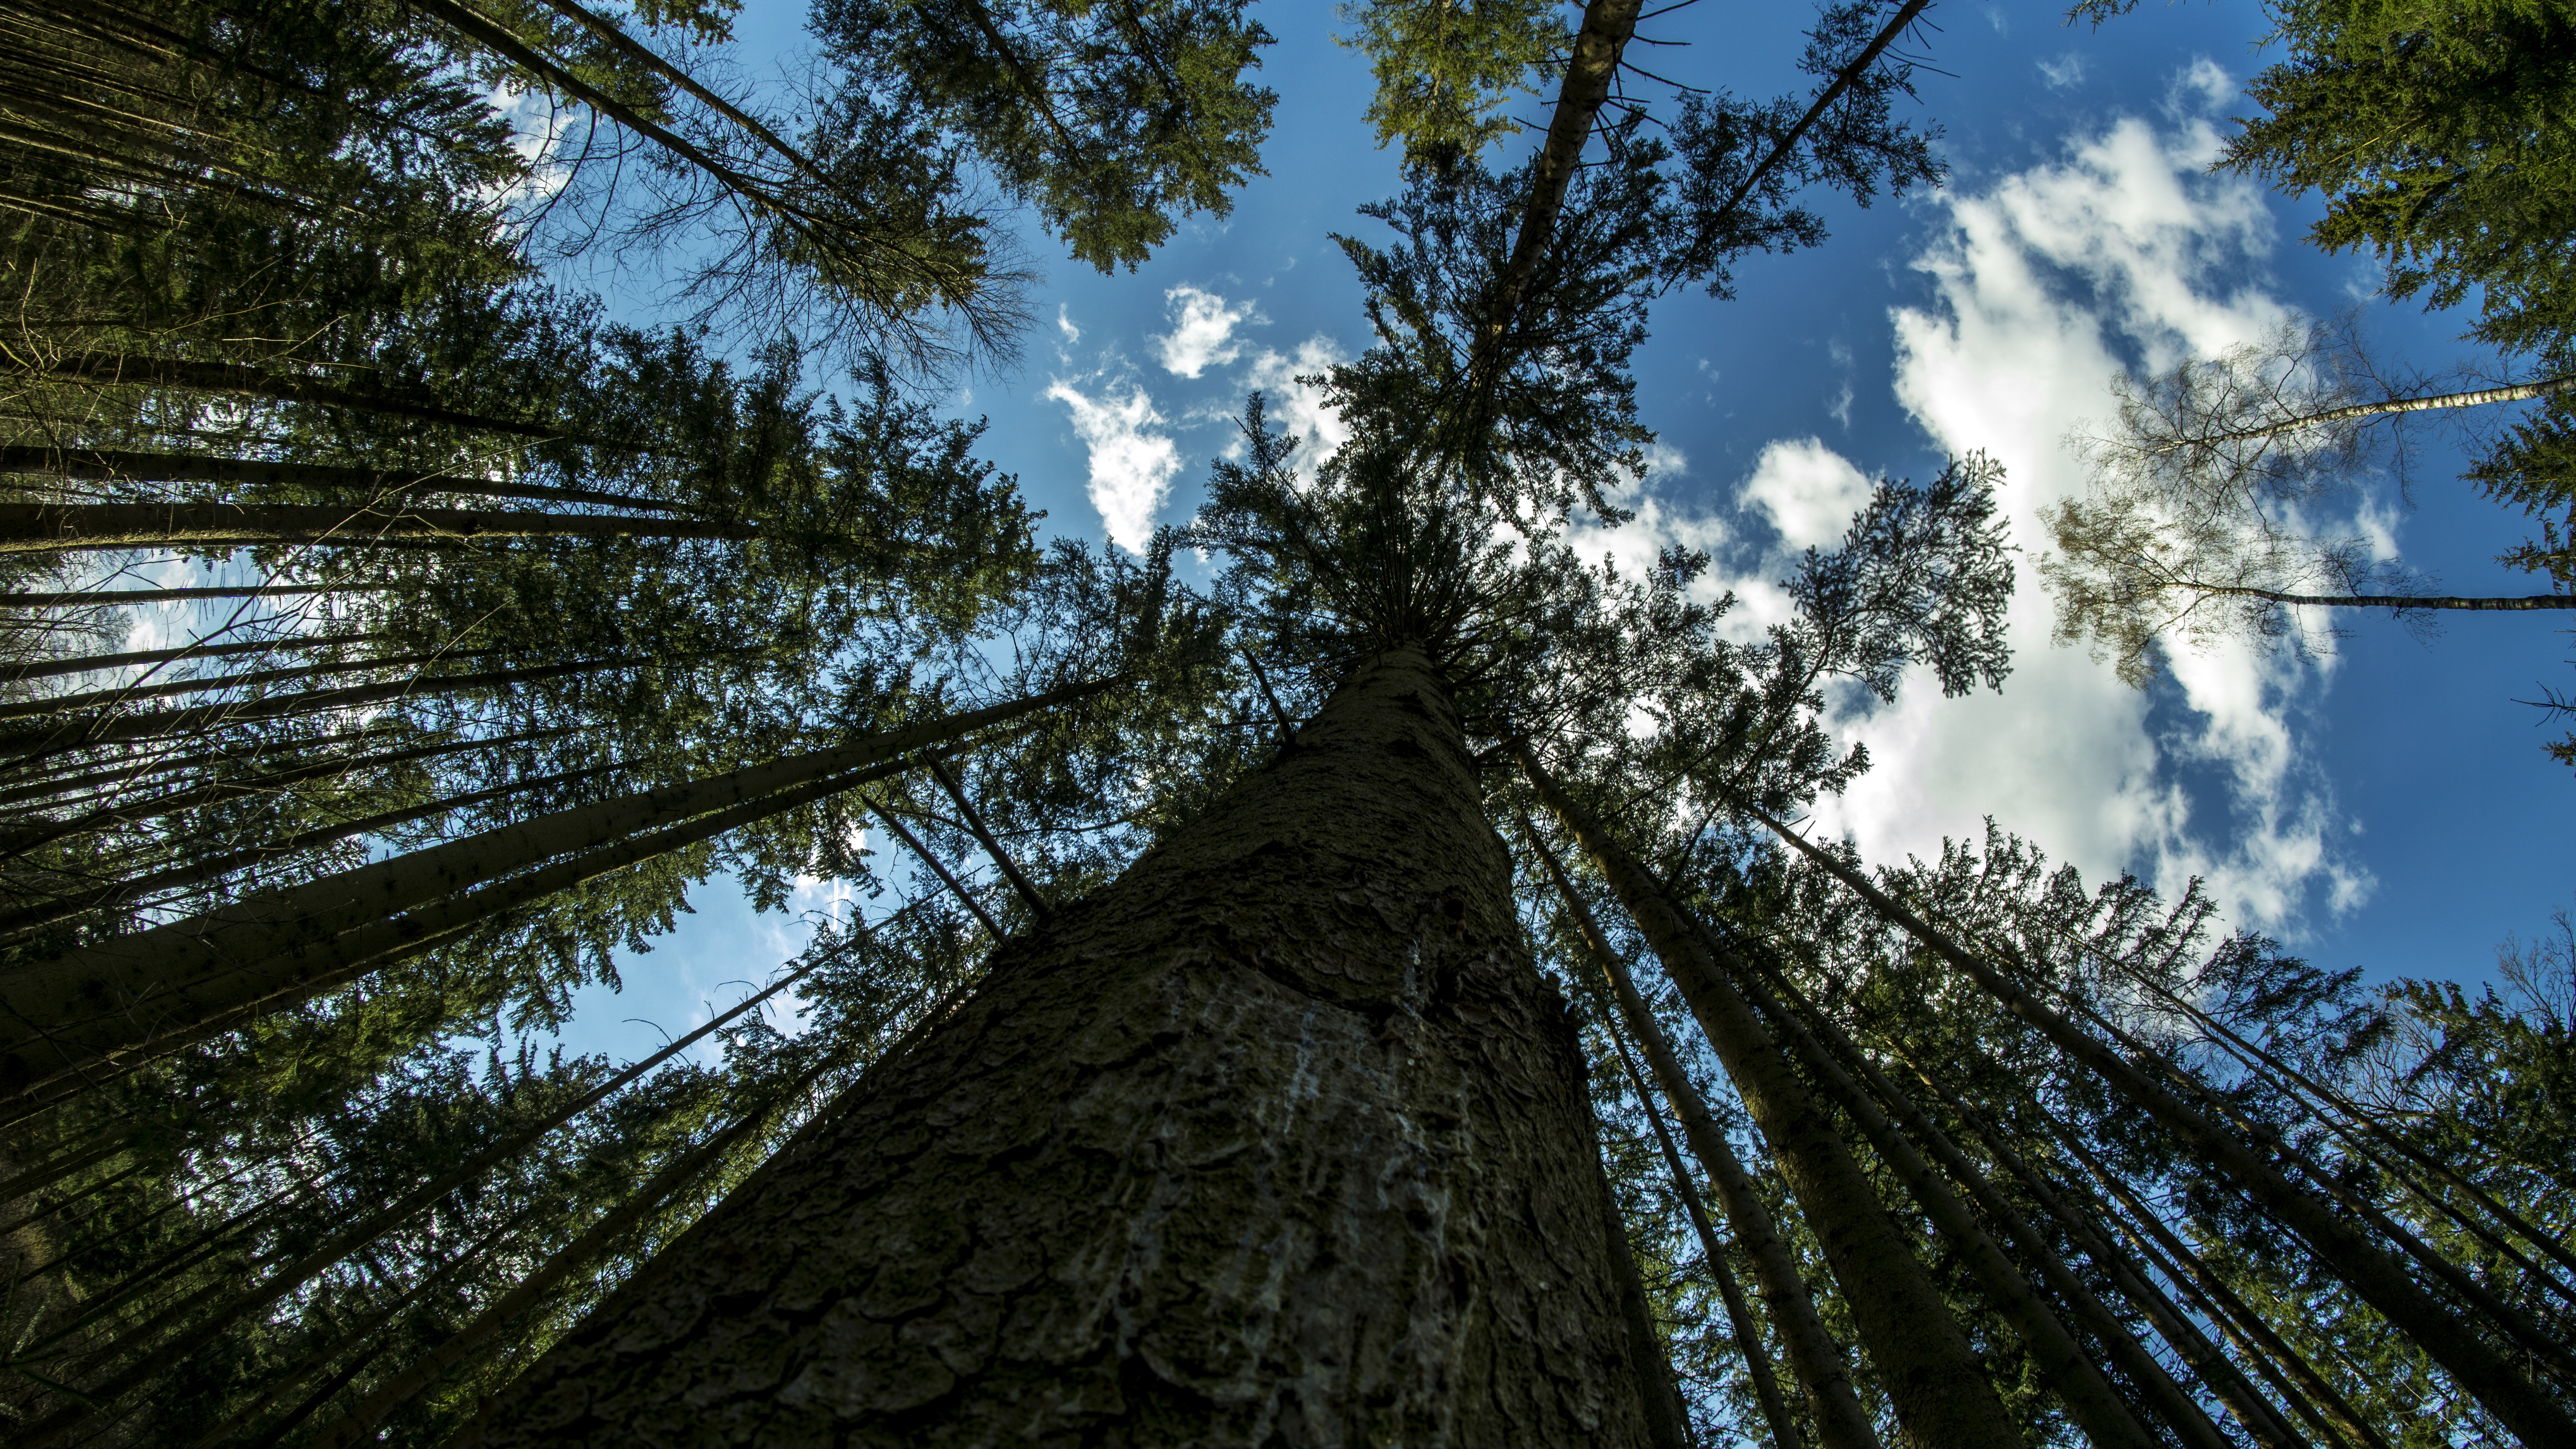 General 6000x3376 nature trees forest sky clouds wood worm's eye view bottom view photography fisheye lens